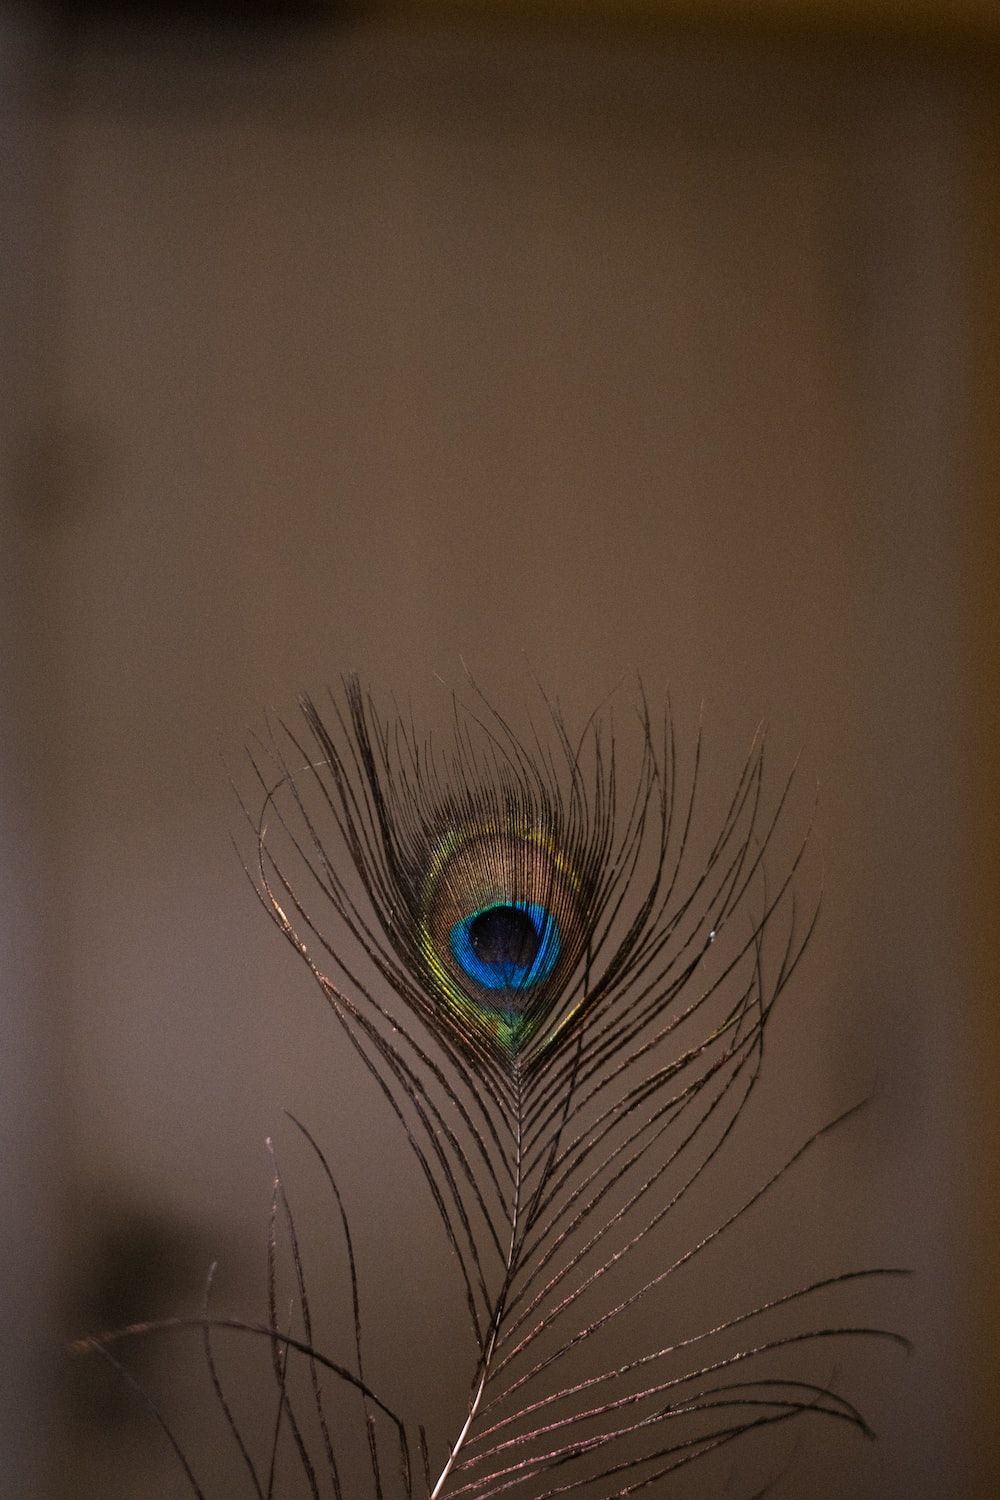 A single peacock feather against a dark background. - Feathers